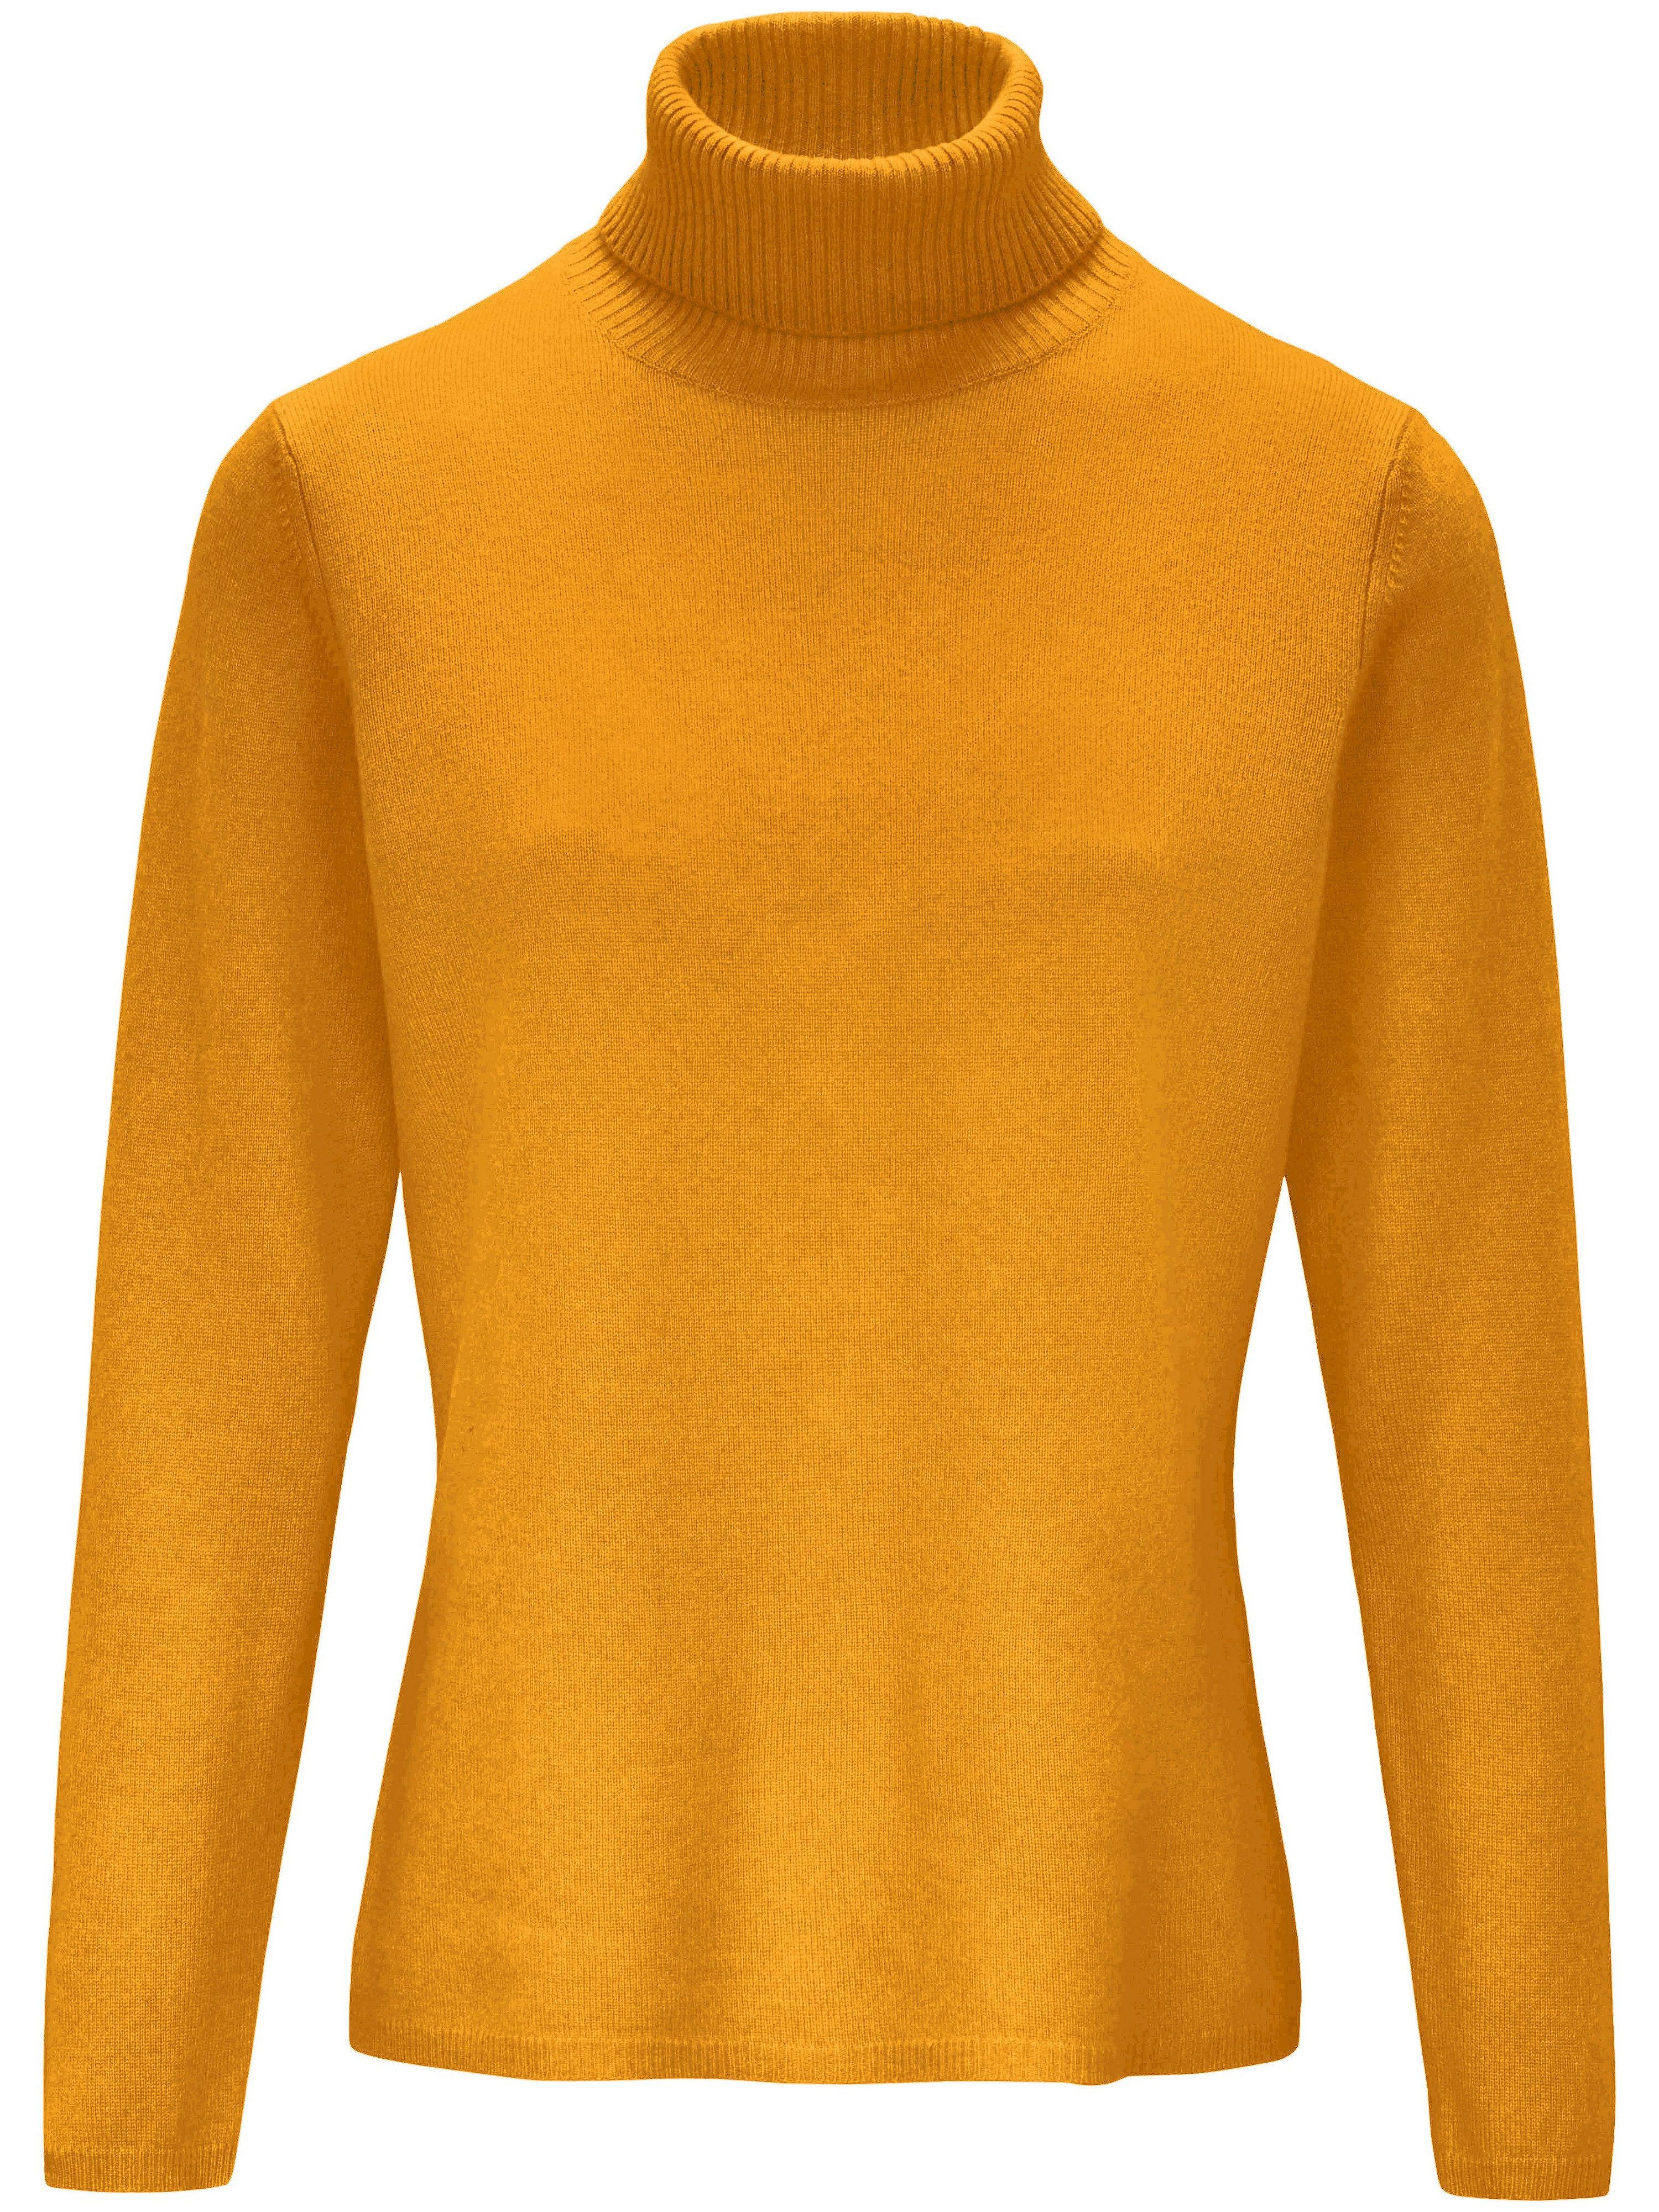 Le pull col roulé  include jaune taille 40